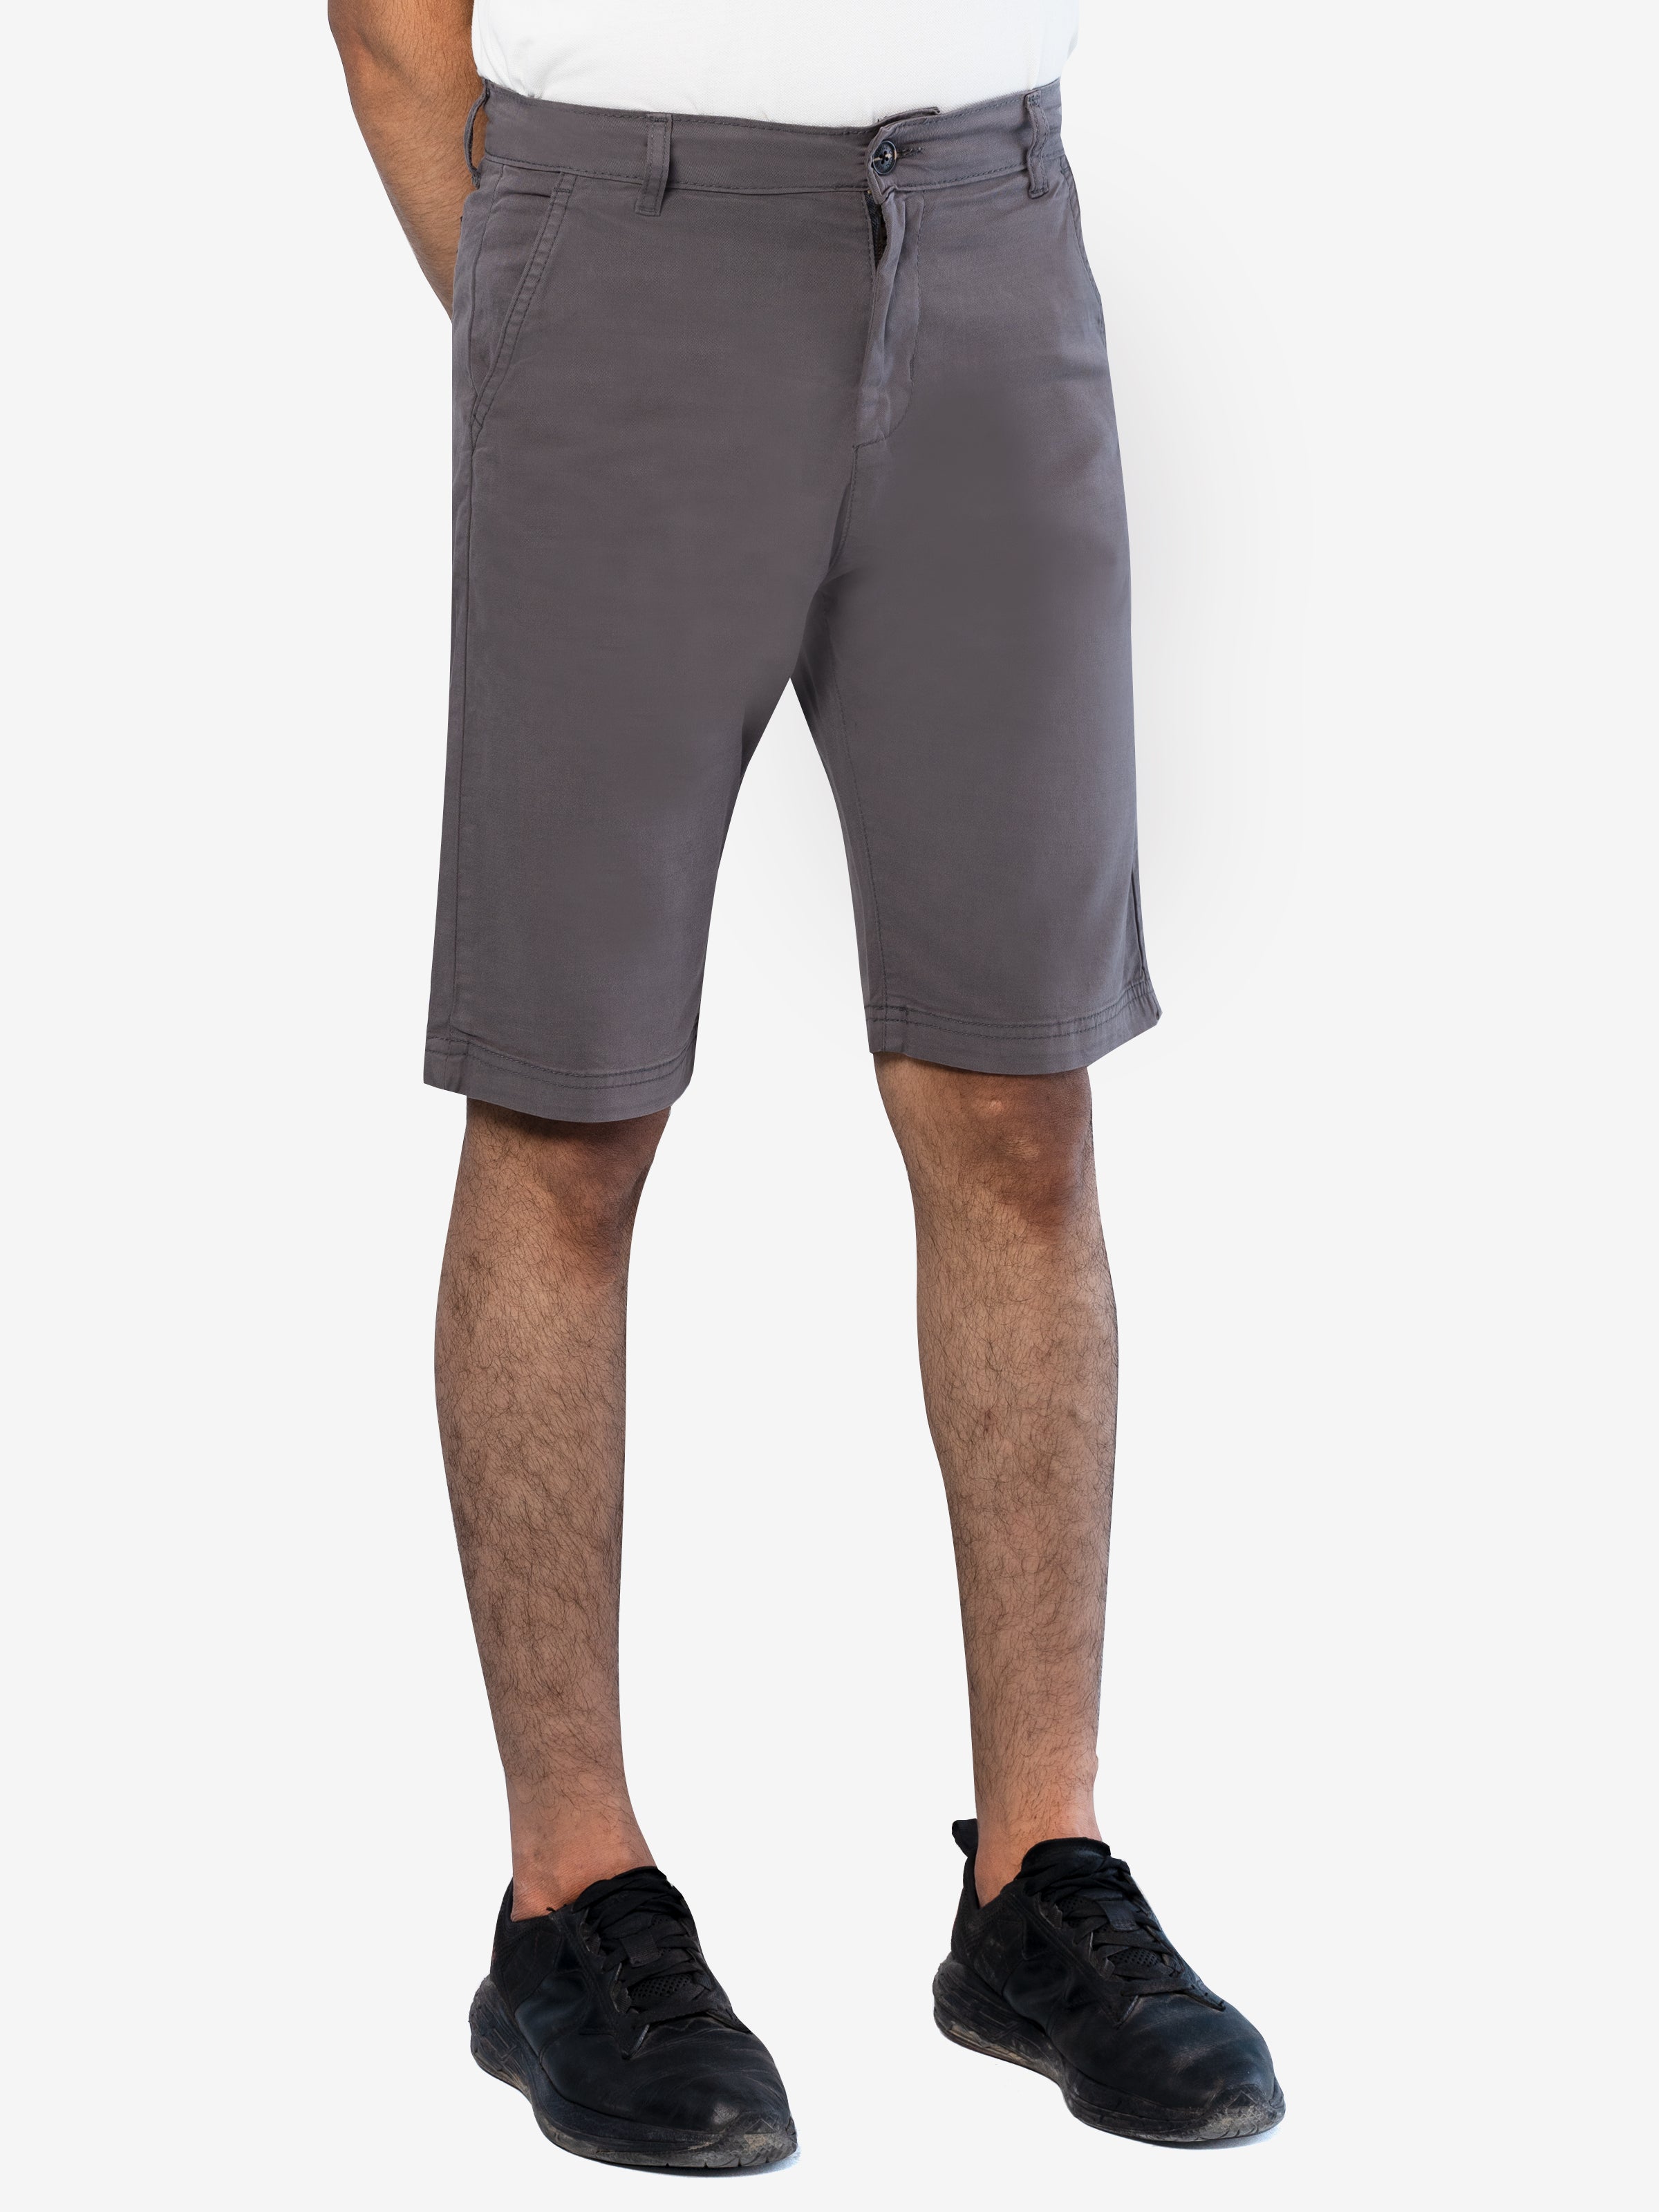 CASUAL SHORTS SMART FIT GREY